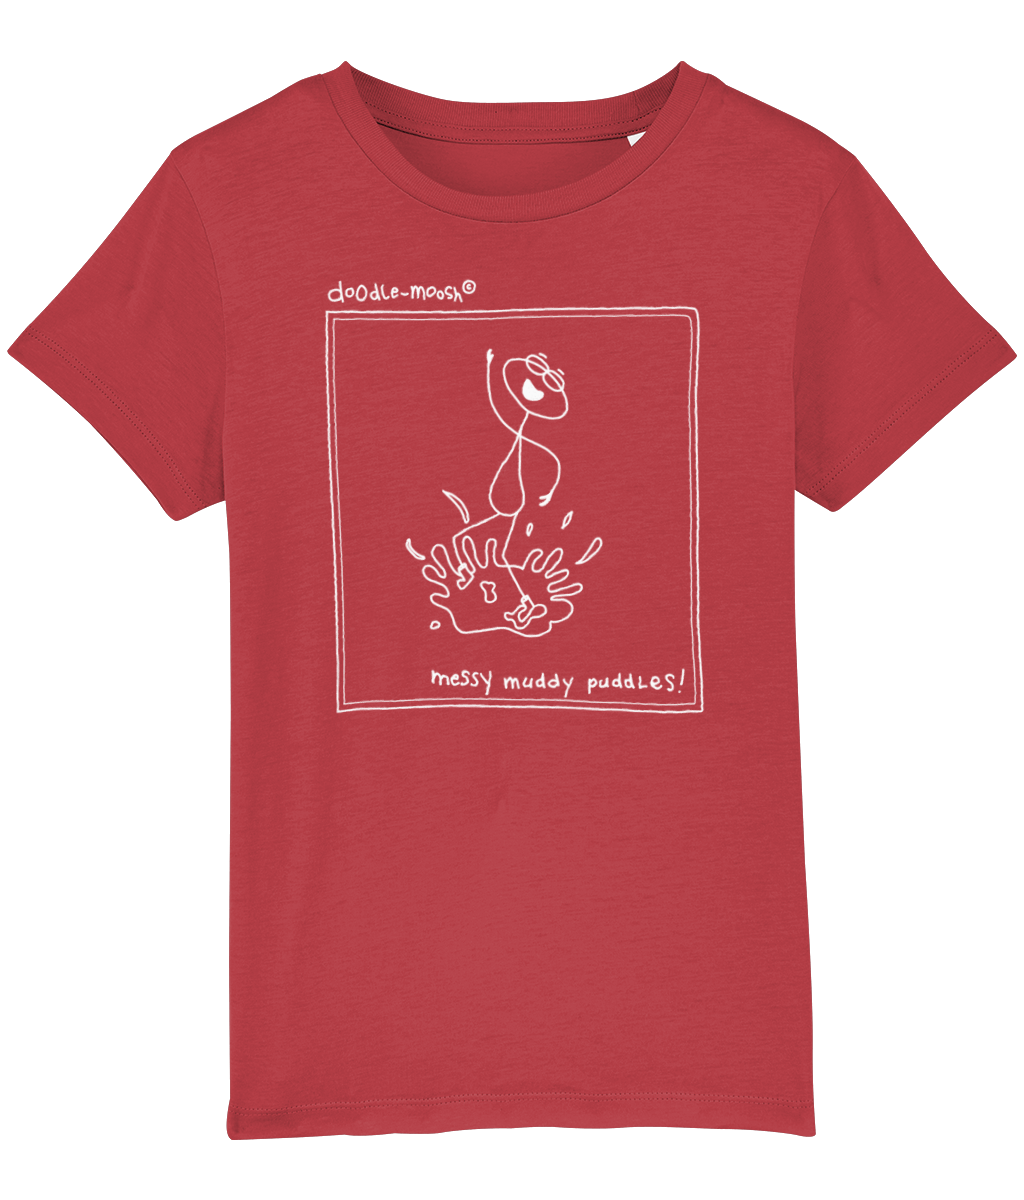 Messy muddy puddles t-shirt, red with white